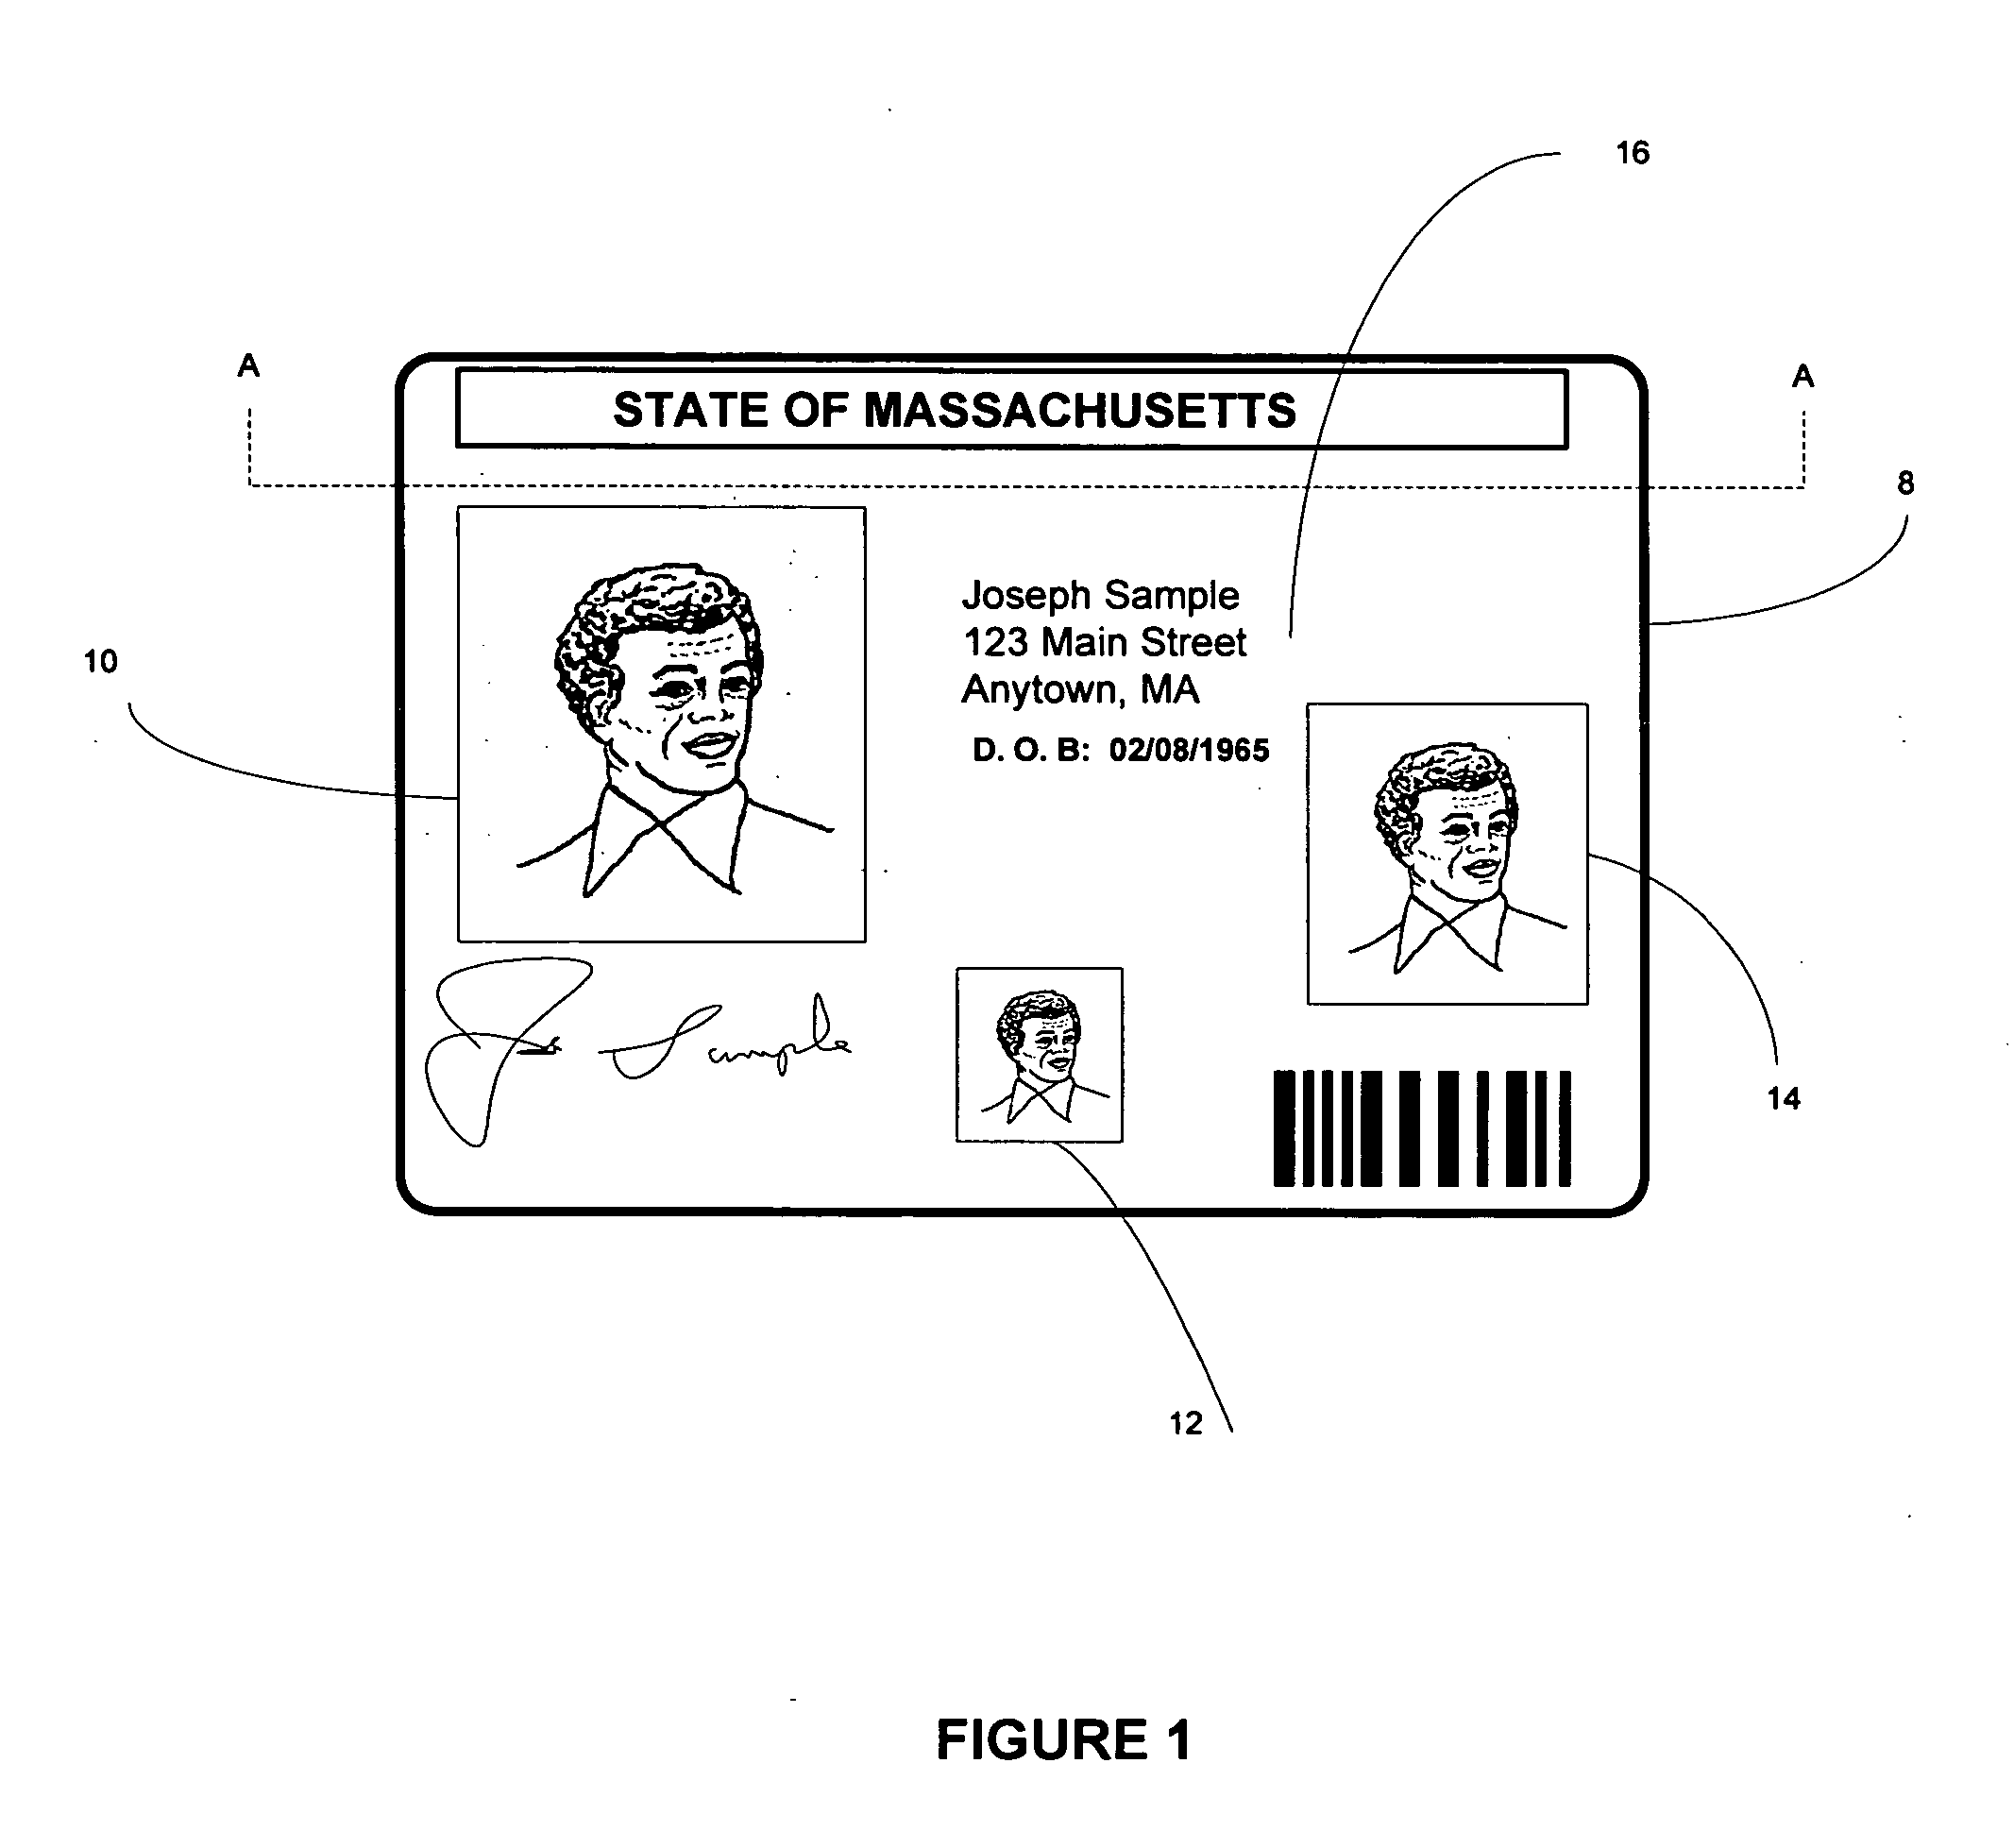 Optically variable personalized indicia for identification documents